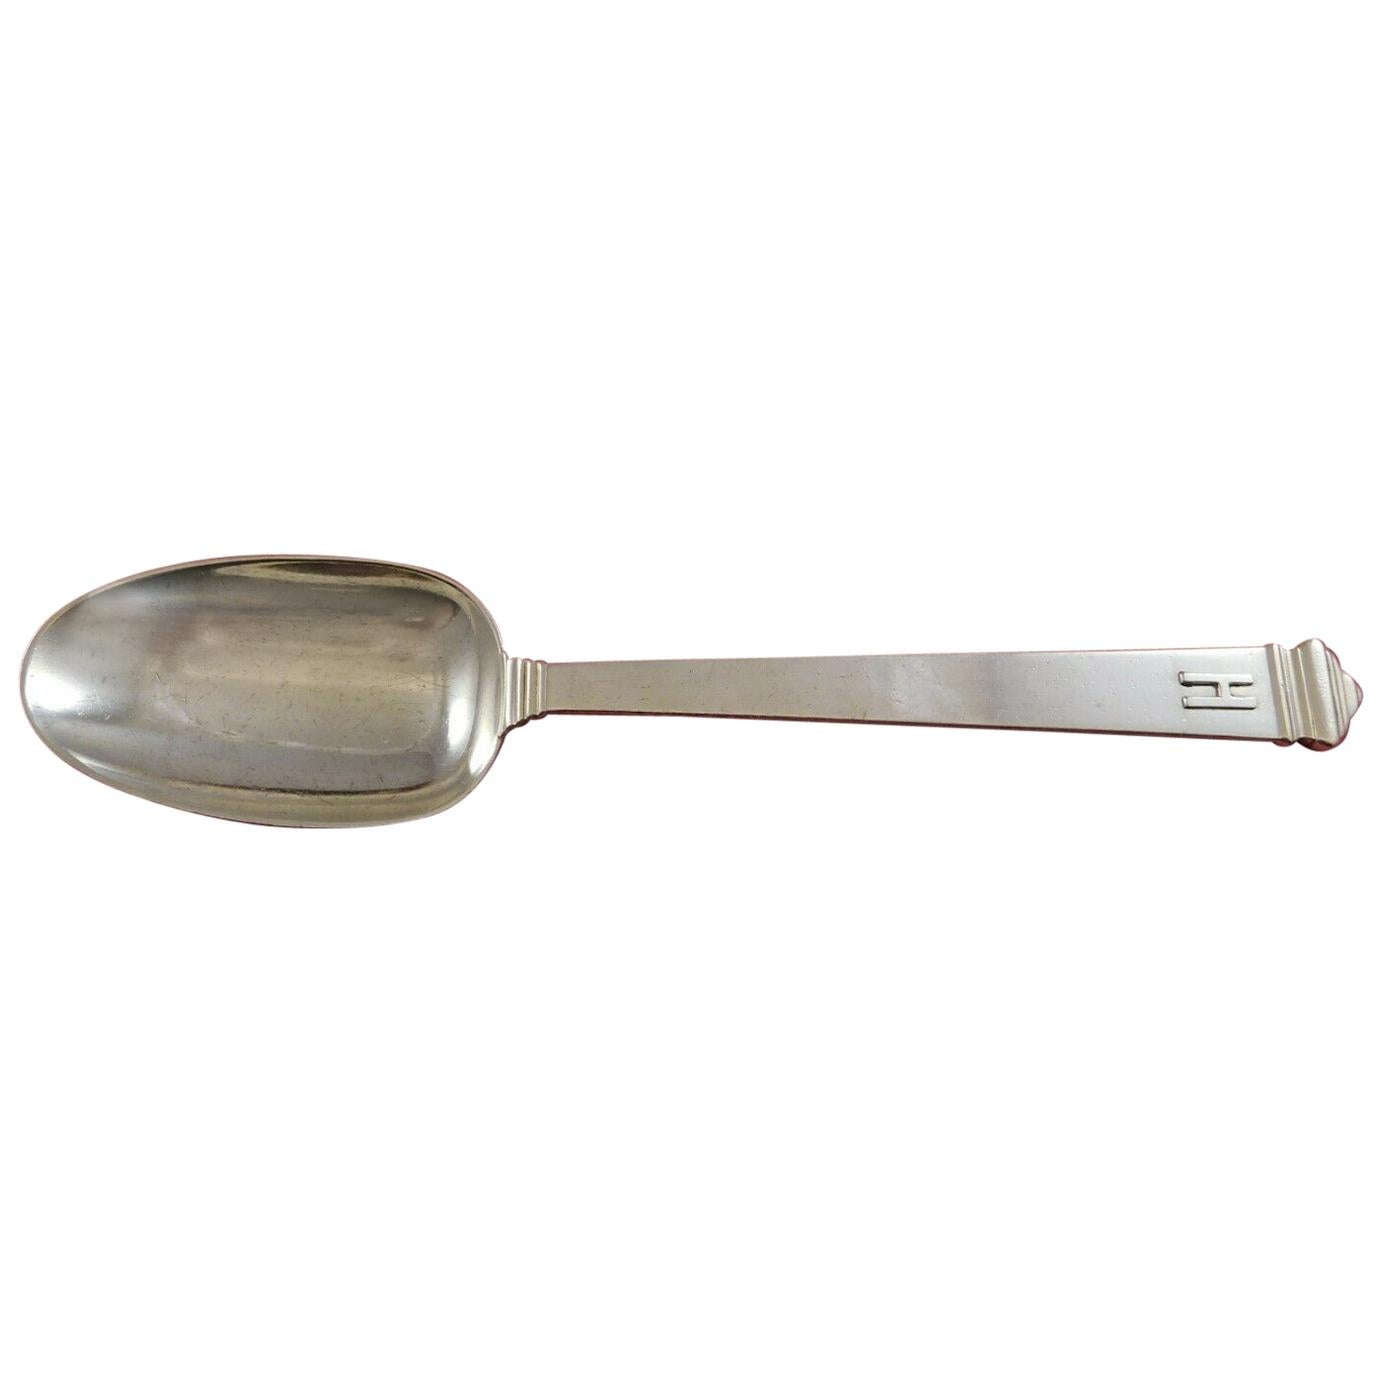 Hampton by Tiffany Sterling Silver Serving Spoon with Applied H Mono